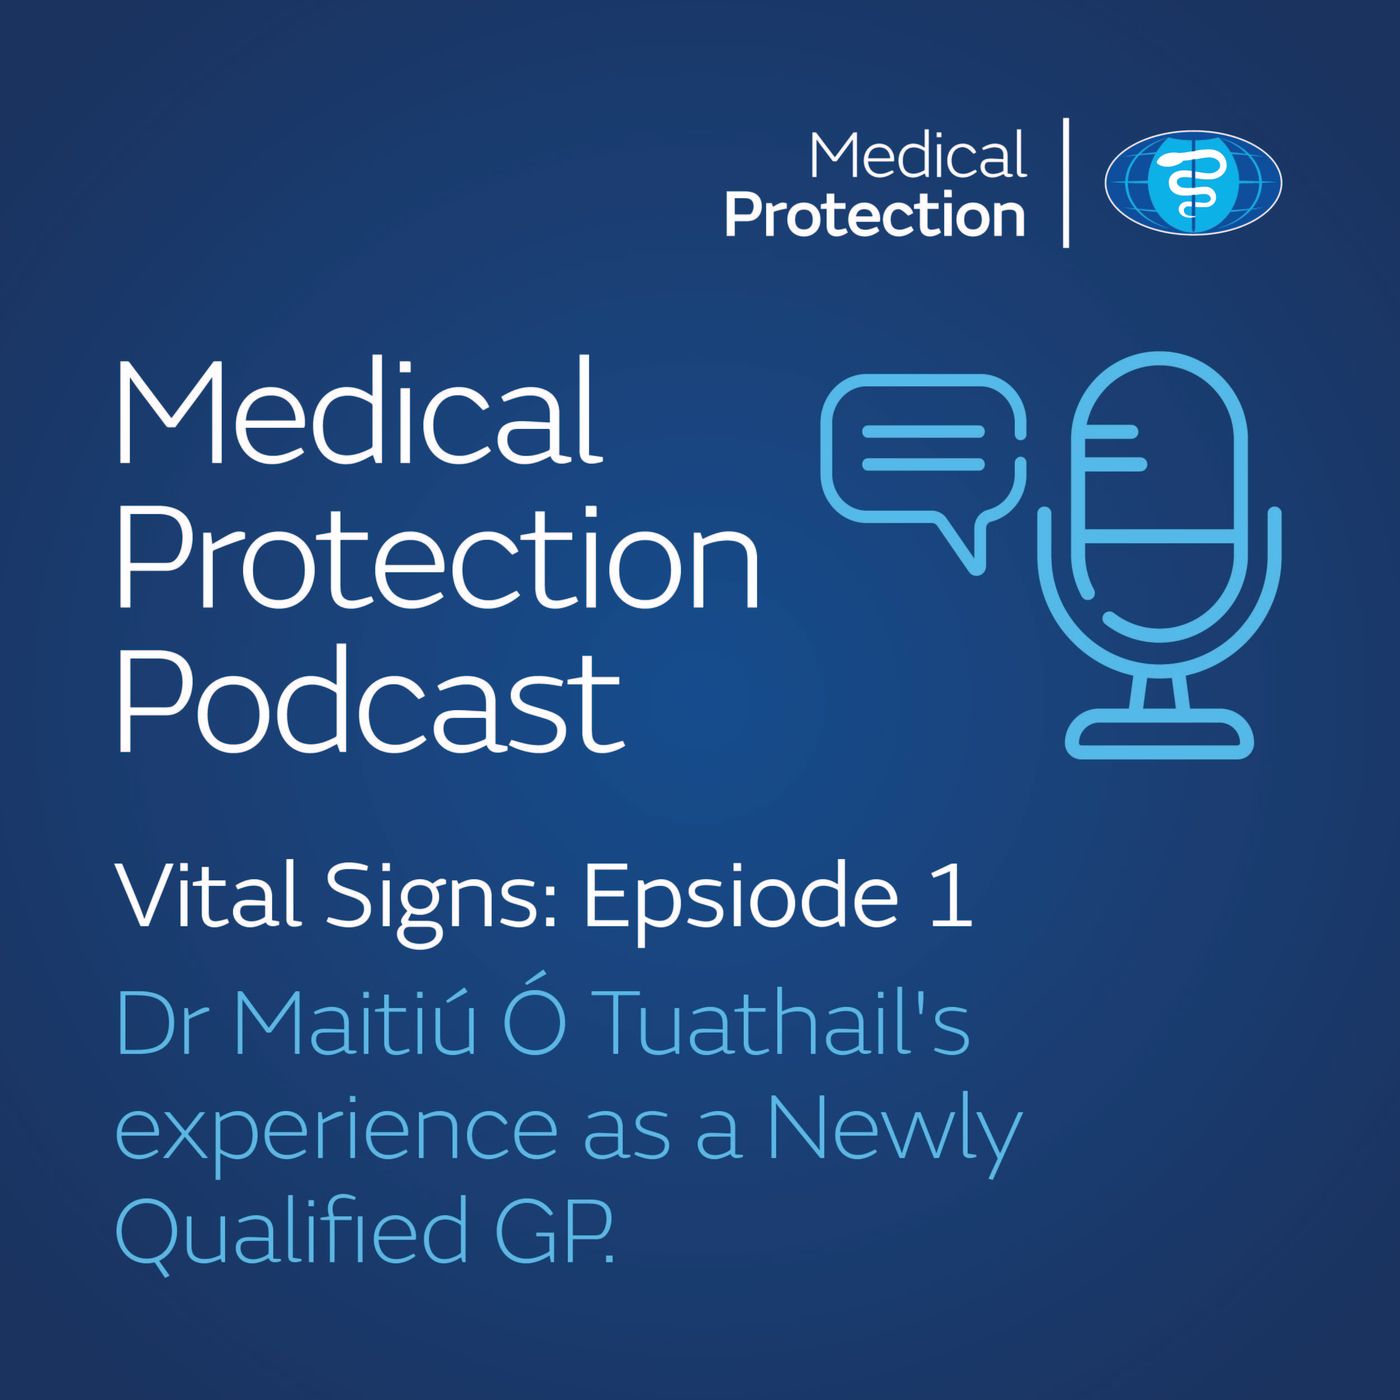 Vital Signs episode 1: Dr Maitiú Ó Tuathail's experience as a newly qualified GP.